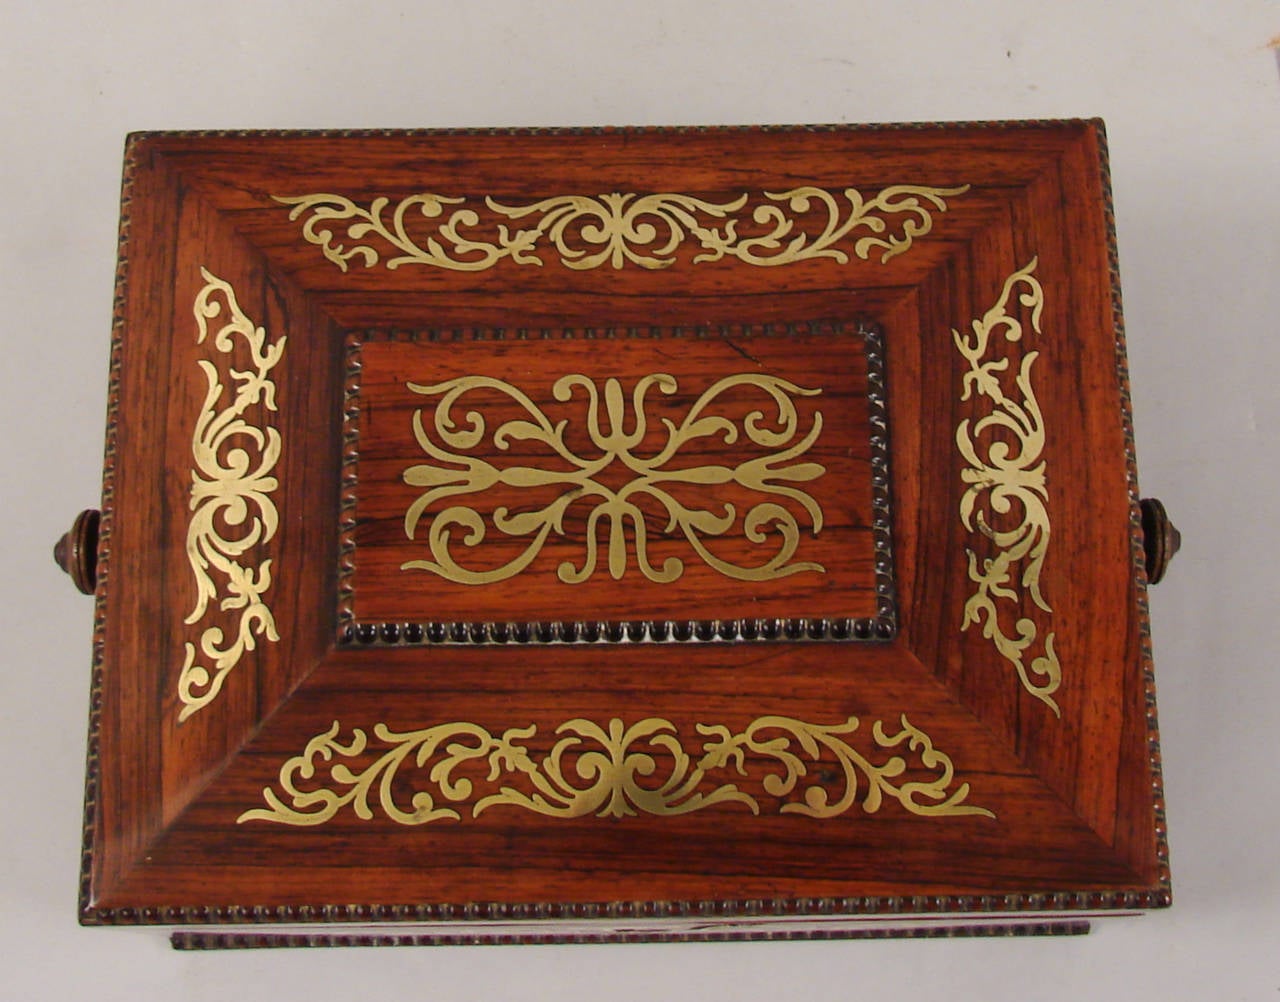 A late Regency period rosewood brass inlaid work box containing a gilt-tooled leather fold out letter file, the interior now lined in blue paper, circa 1835.